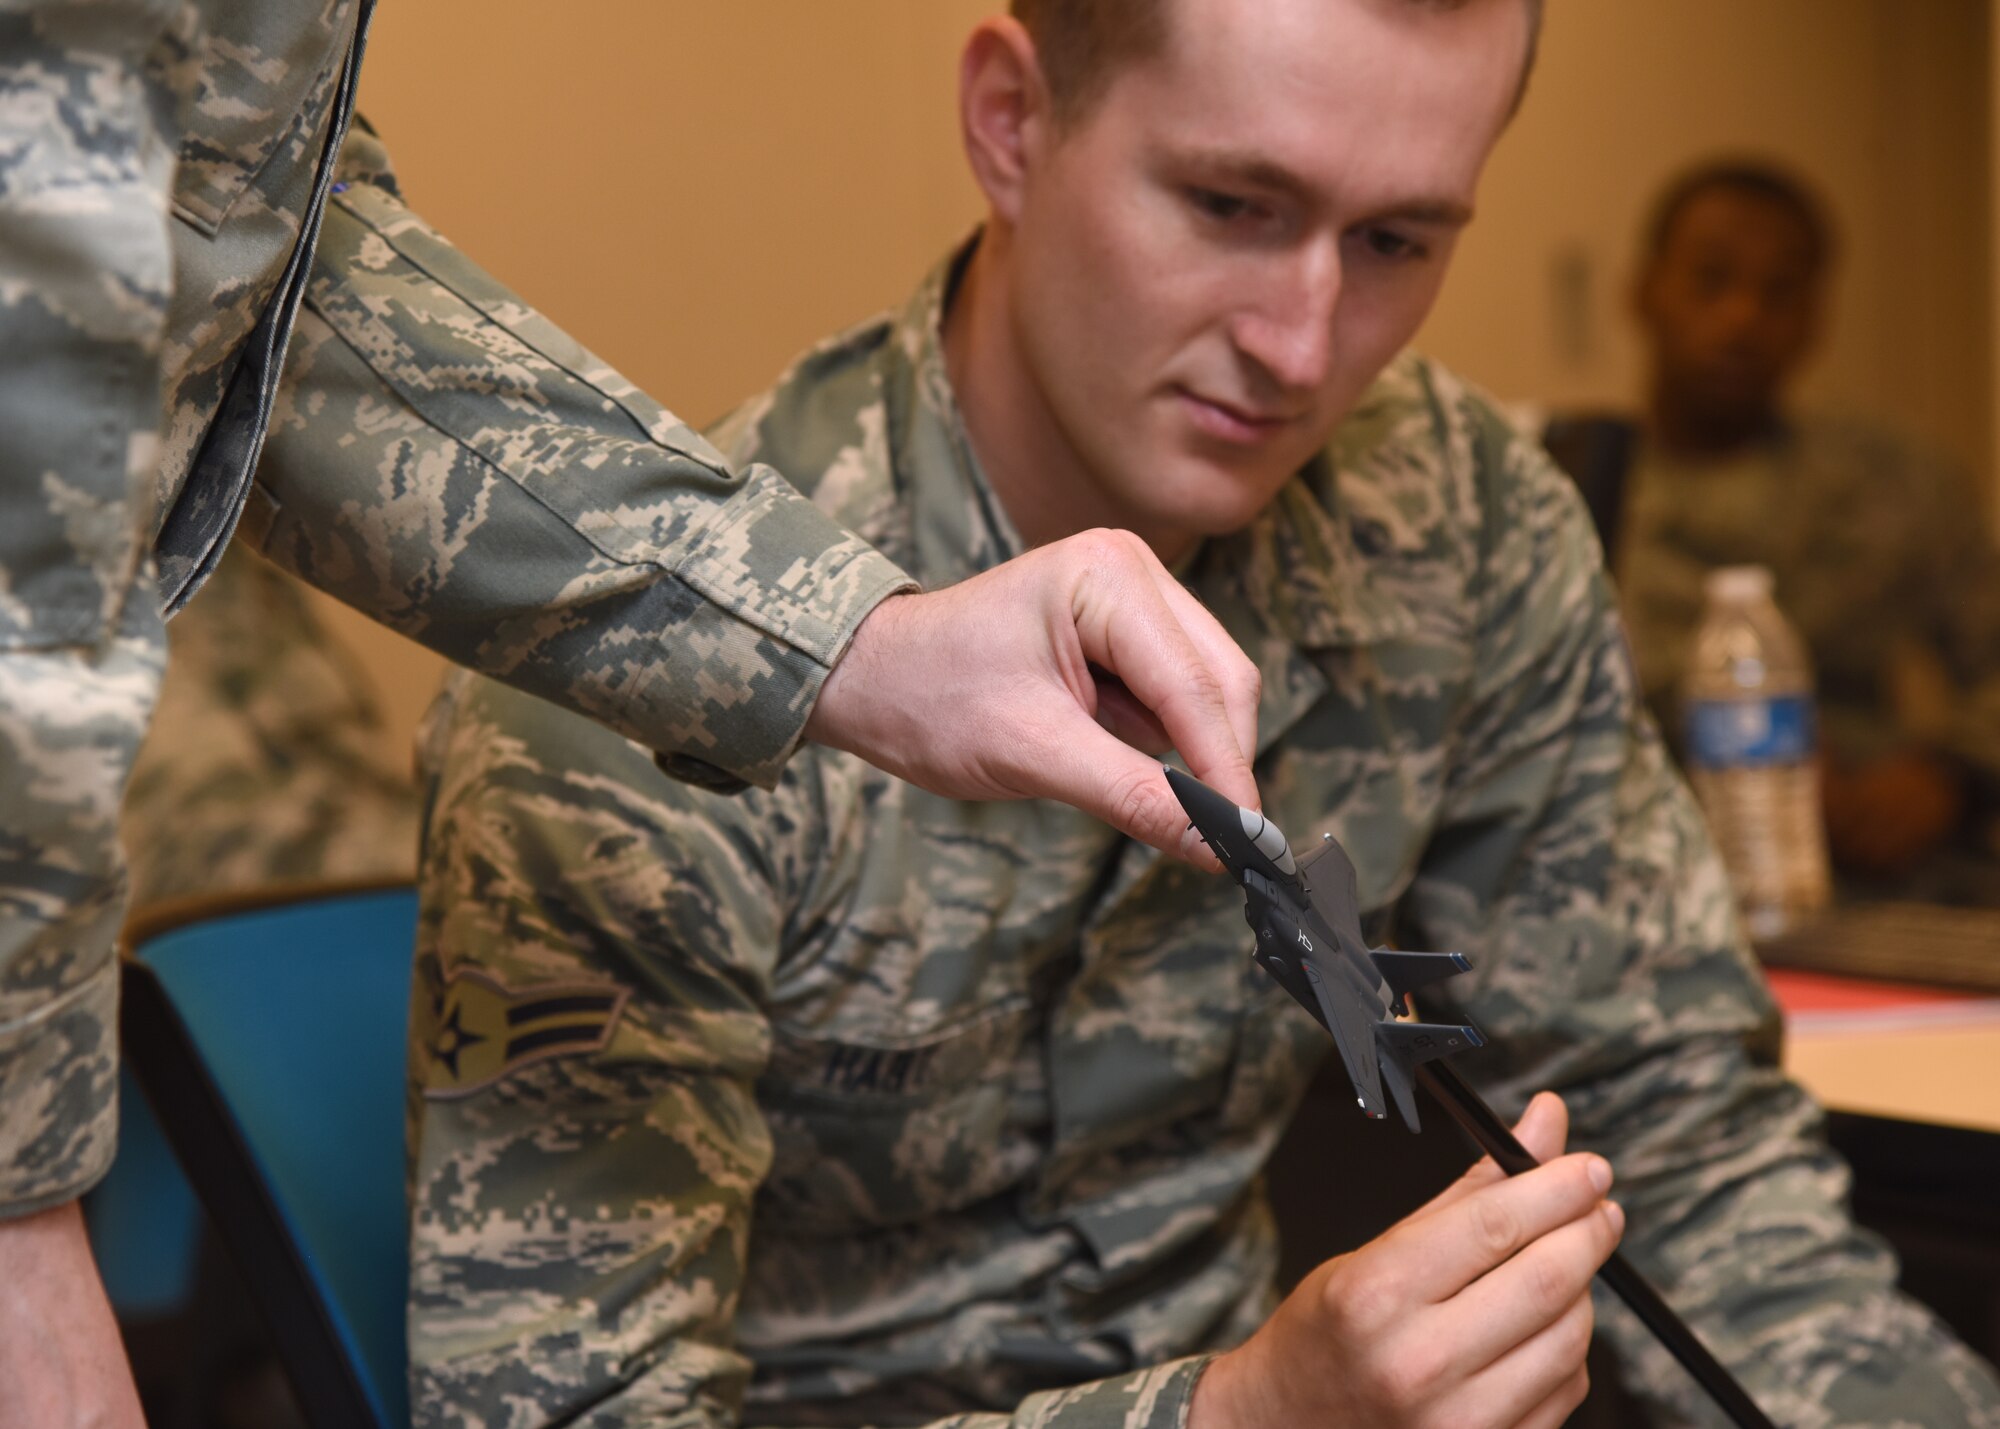 U.S. Air Force Airman 1st Class Neale Hart, 315th Training Squadron student, interacts with a miniature F-15E Strike Eagle aircraft prop as Staff Sgt. William McCauley, 315th TRS student, adjusts the proposed flying angle of the prop in Di Tommaso Hall on Goodfellow Air Force Base, Texas, July 10, 2019. Props are used in this classified learning environment to demonstrate larger-than-life concepts, which aid the students who learn visually. (U.S. Air Force photo by Airman 1st Class Abbey Rieves/Released)